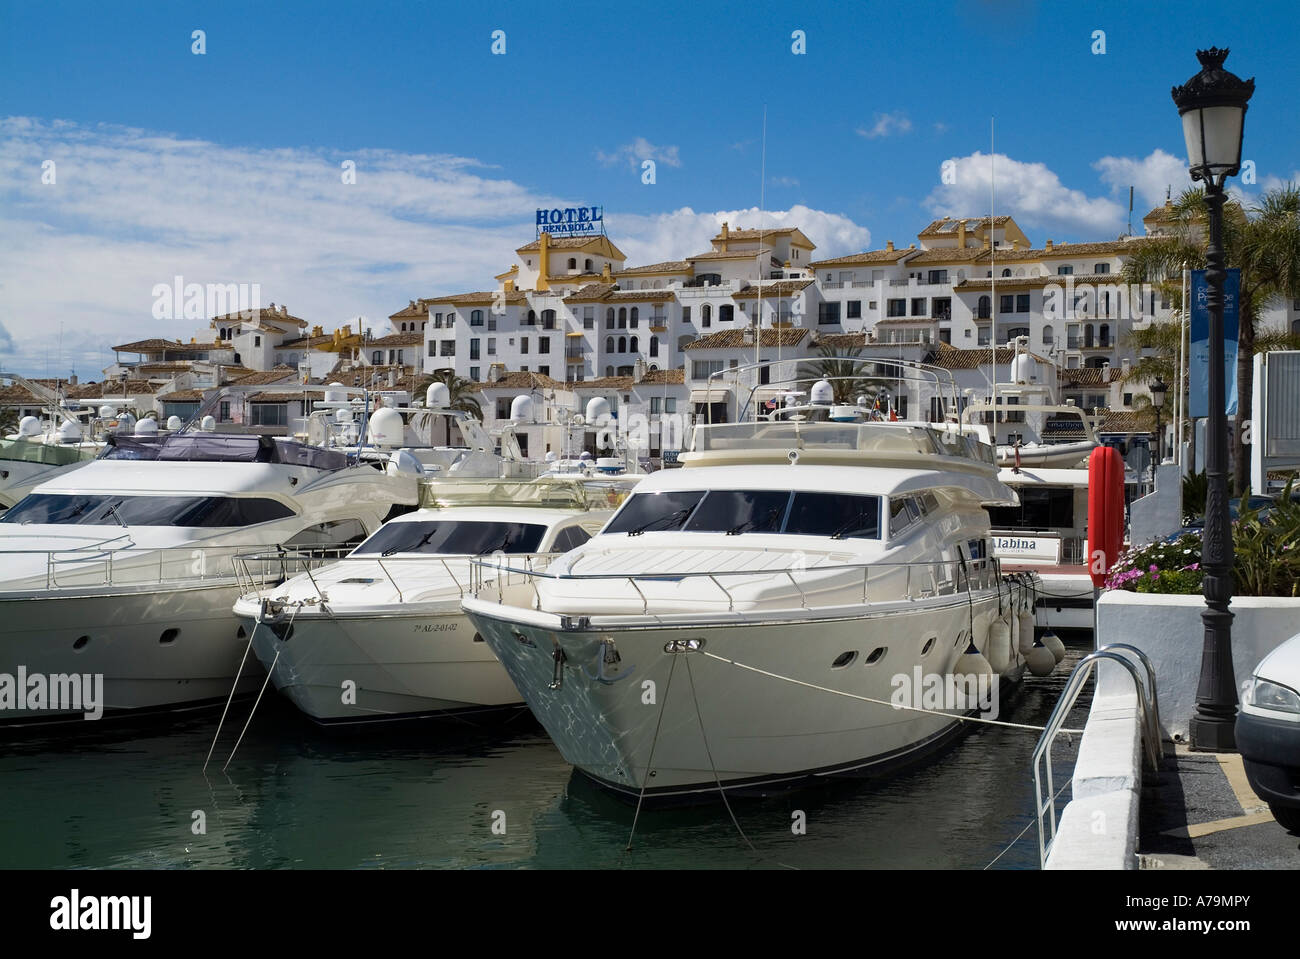 dh Harbour Marina PUERTO BANUS SPAIN Marbella Luxury yachts at jetty building overlooking harbor waterfront yacht berth rich mooring europe quayside Stock Photo